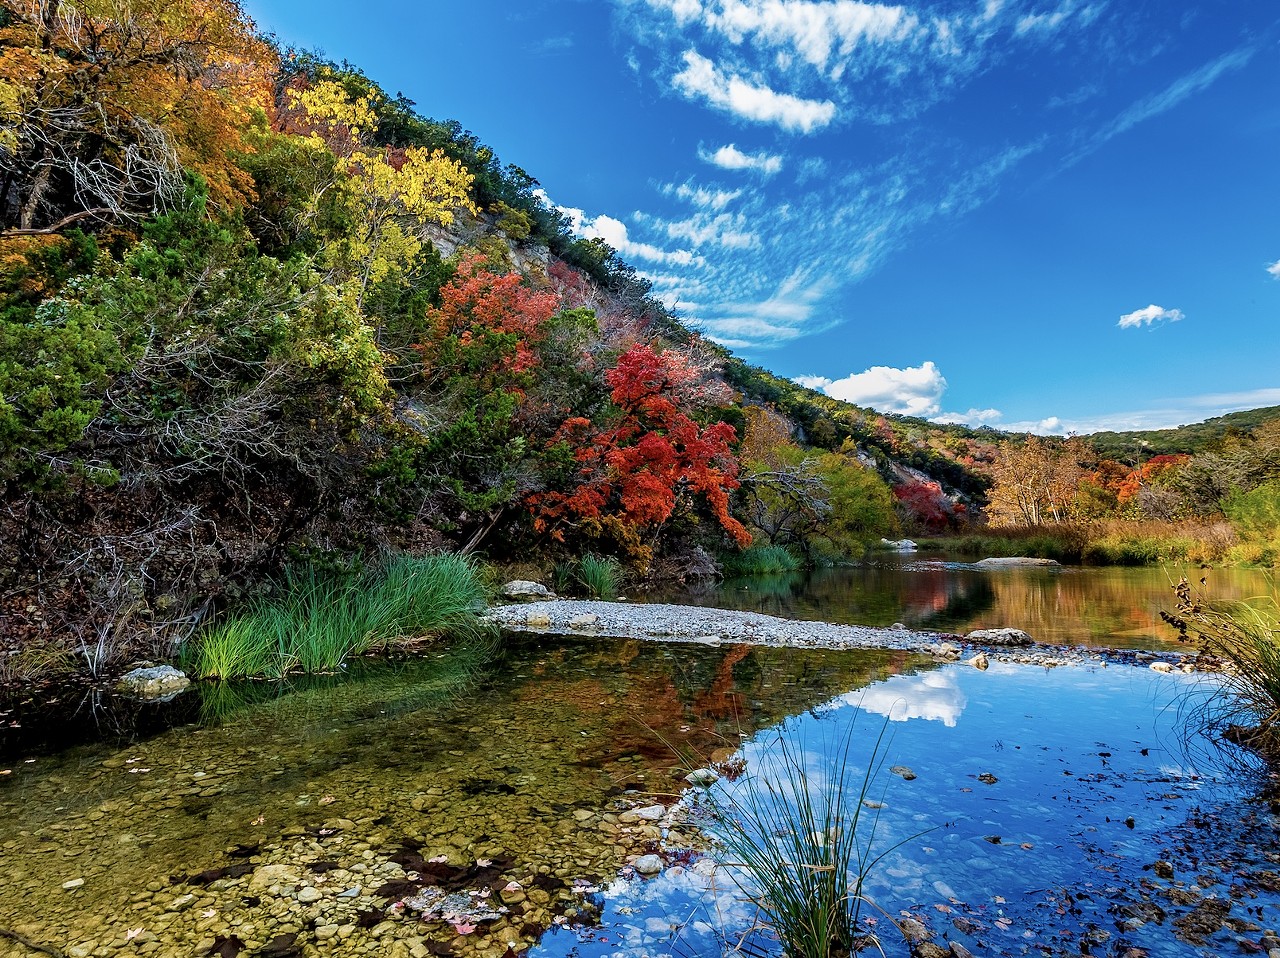 Lost Maples State Natural Area
About a 2 hour drive northwest of San Antonio
Lost Maples is a top destination for outdoor lovers for a reason. The park features more than 10 miles of trails, including one loop that offers a breathtaking view from the top of a 2,200-foot cliff. Lost Maples is worth a visit at all times of year, but is especially renowned for its Uvalde bigtooth maples, which burst into vibrant colors in the fall.